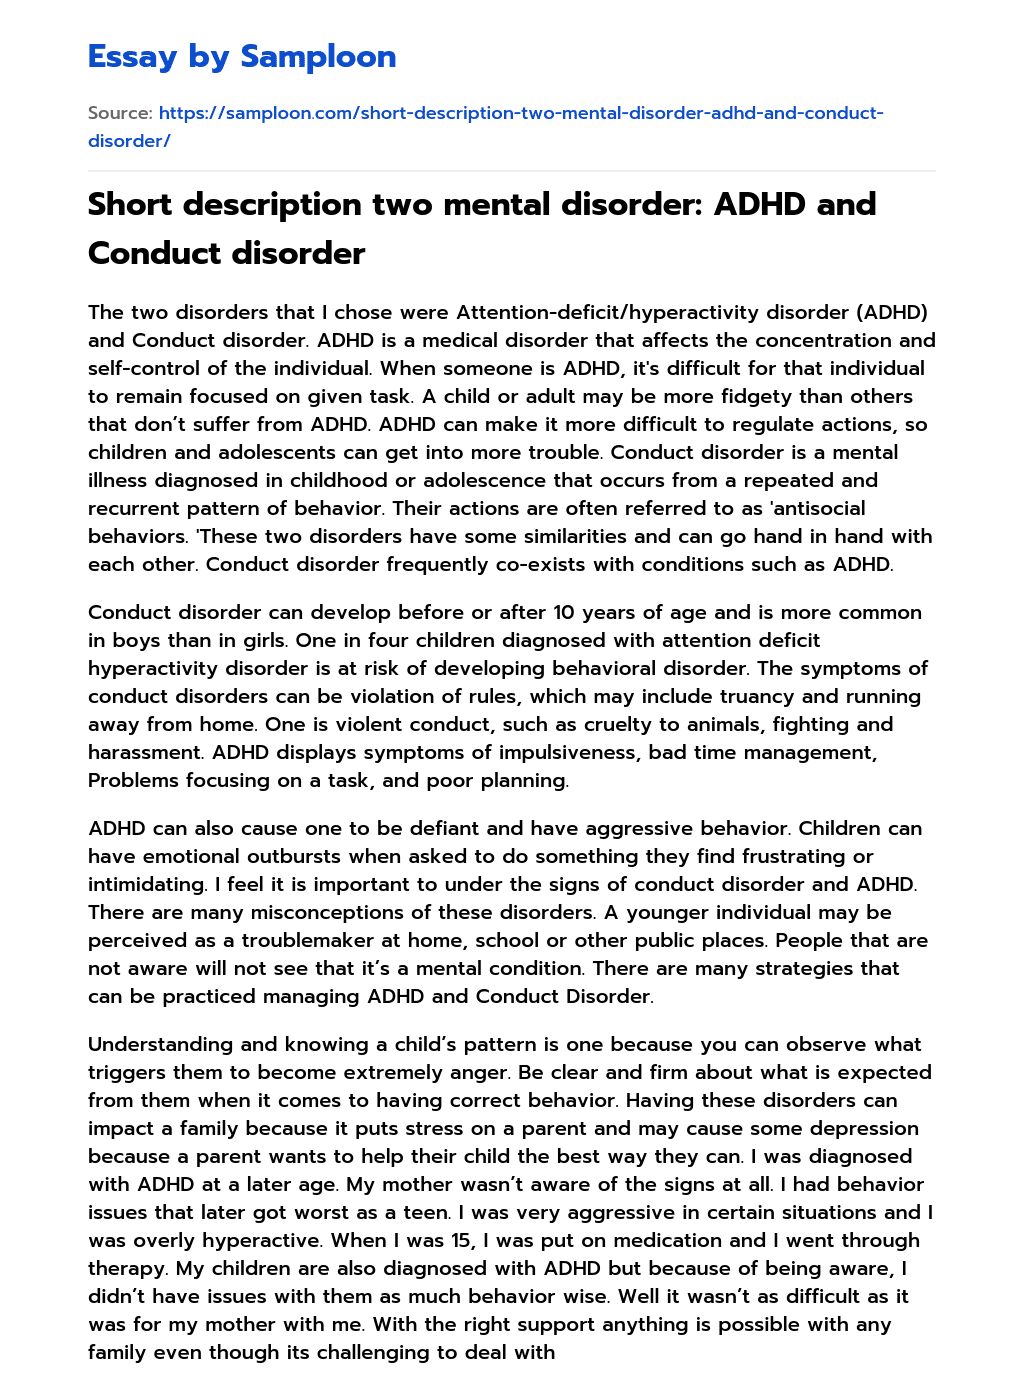 Short description two mental disorder: ADHD and Conduct disorder essay